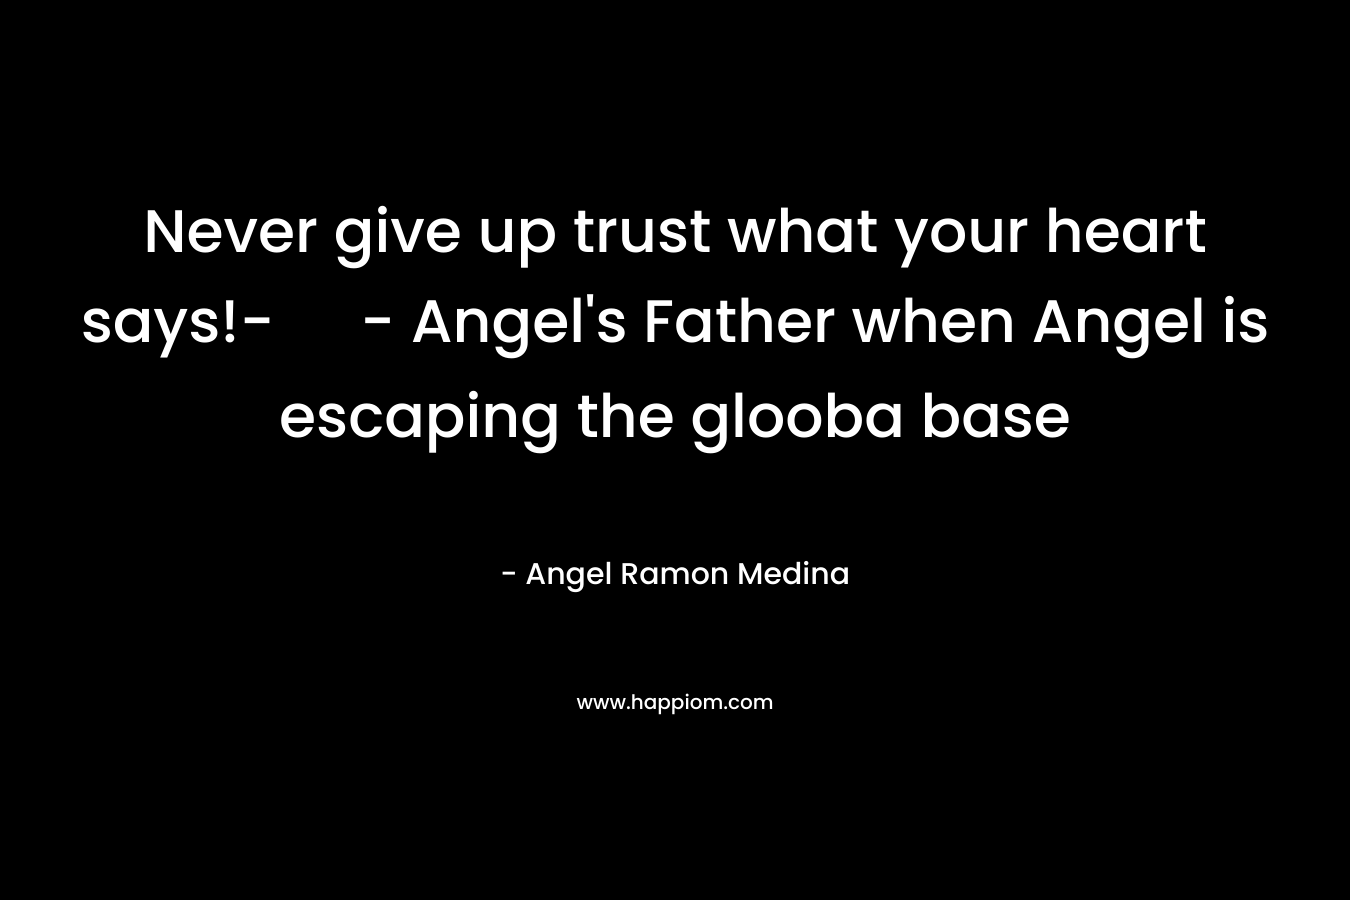 Never give up trust what your heart says!- - Angel's Father when Angel is escaping the glooba base